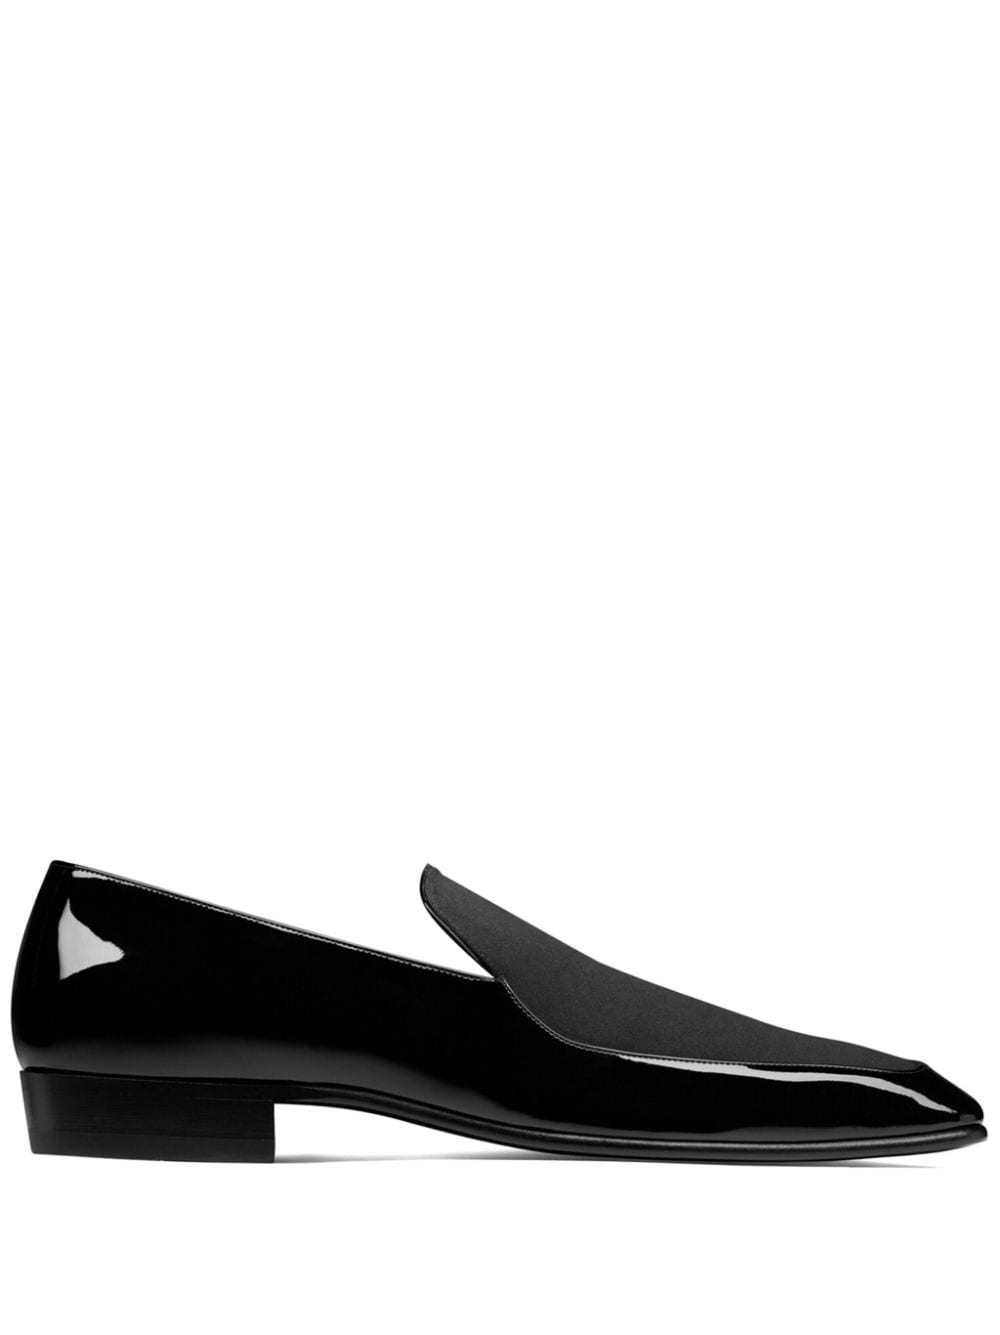 Saint Laurent Clown 20 Leather Loafers In Black